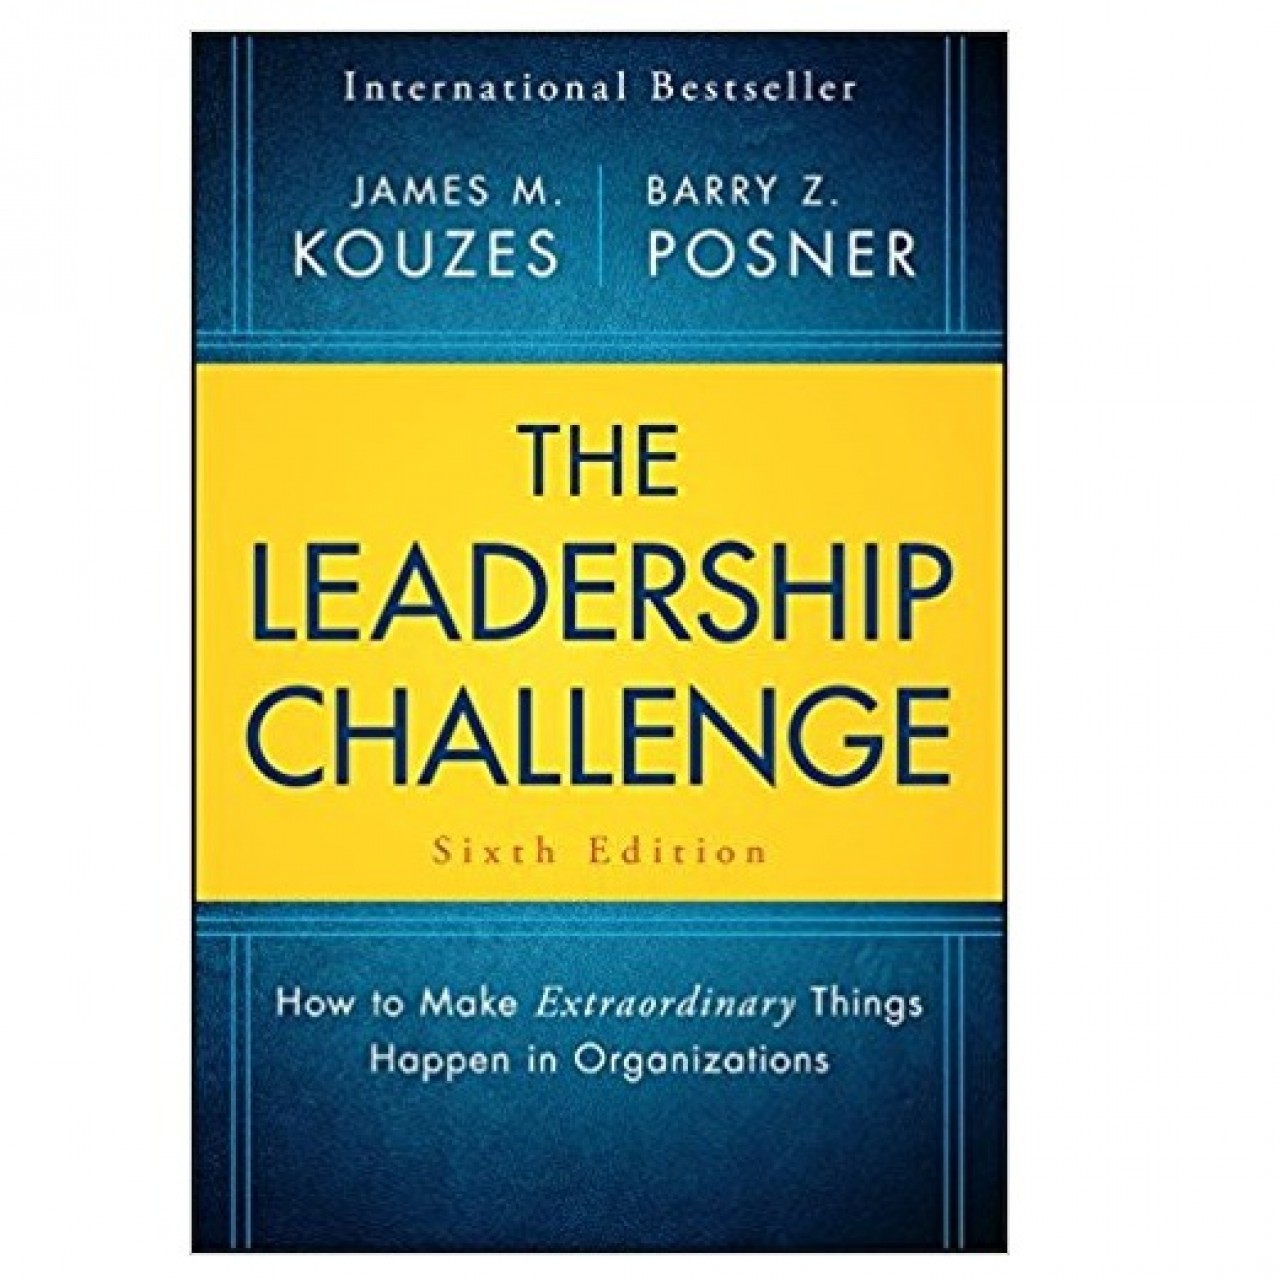 The Leadership Challenge: How To Make Extraordinary Things Happen In Organizations